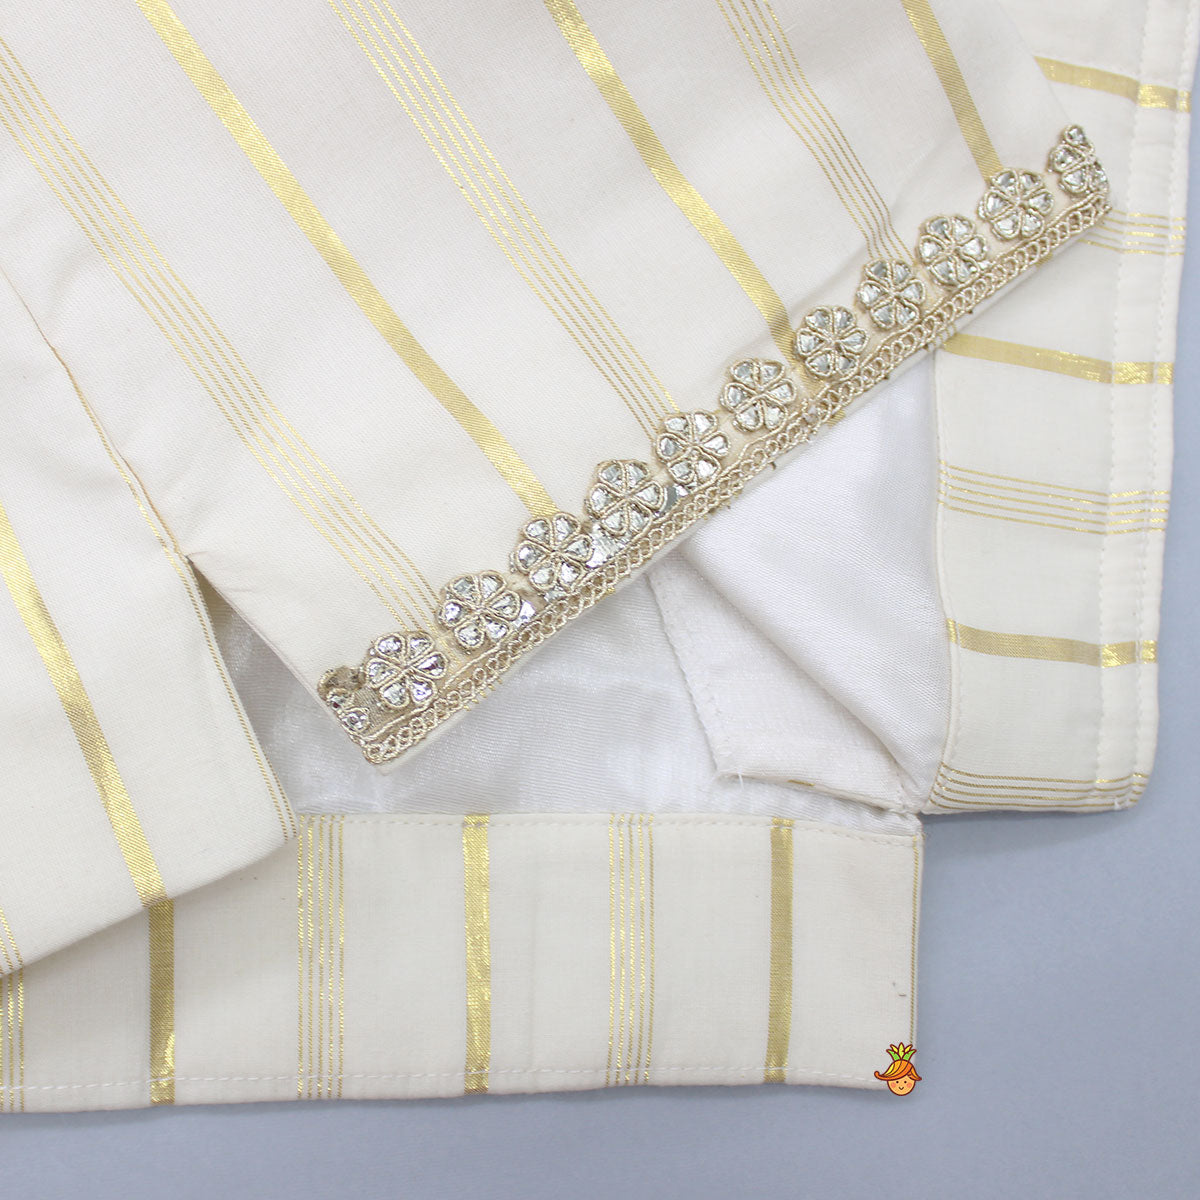 Off White Embroidered Cotton Kurta With Shimmery Pocket Square Jacket And Pyjama